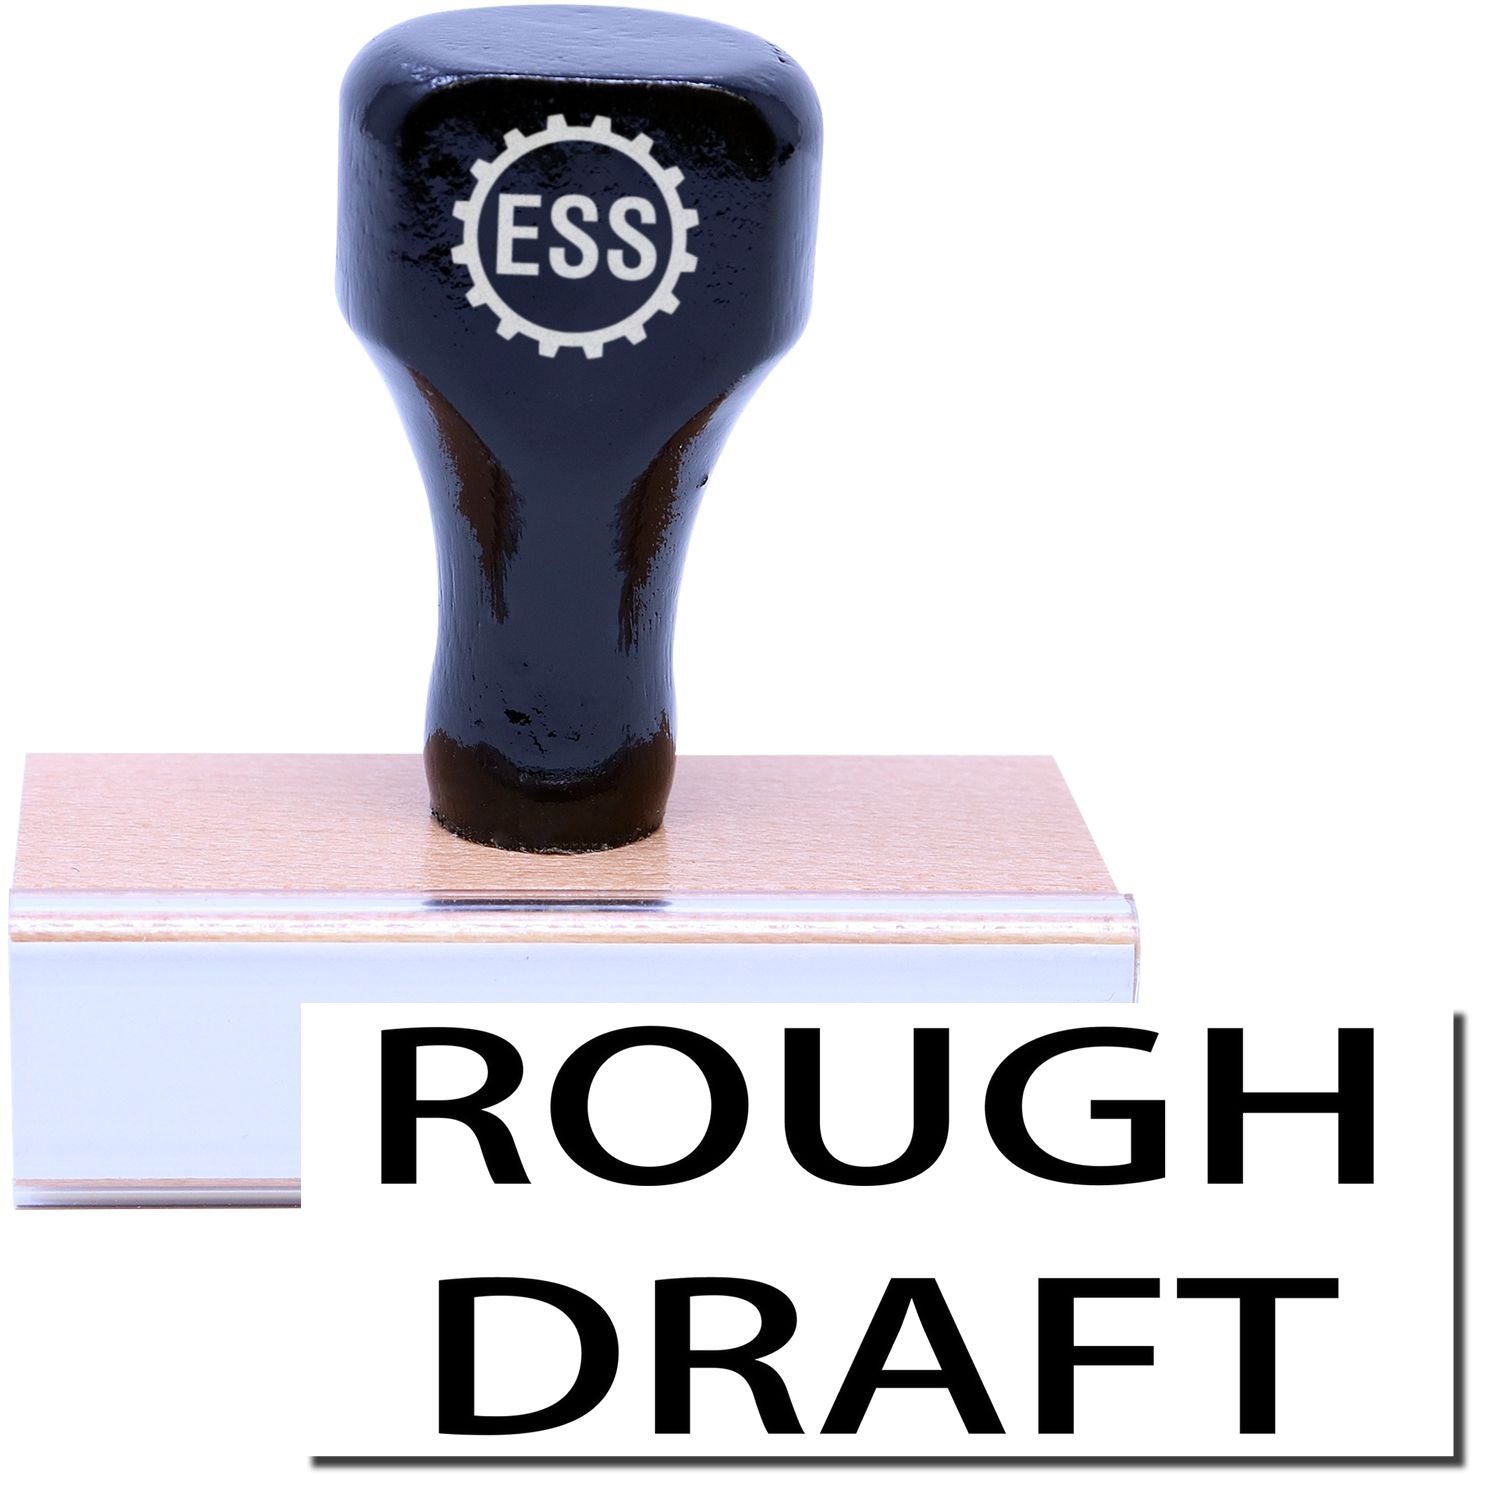 A stock office rubber stamp with a stamped image showing how the text "ROUGH DRAFT" is displayed after stamping.